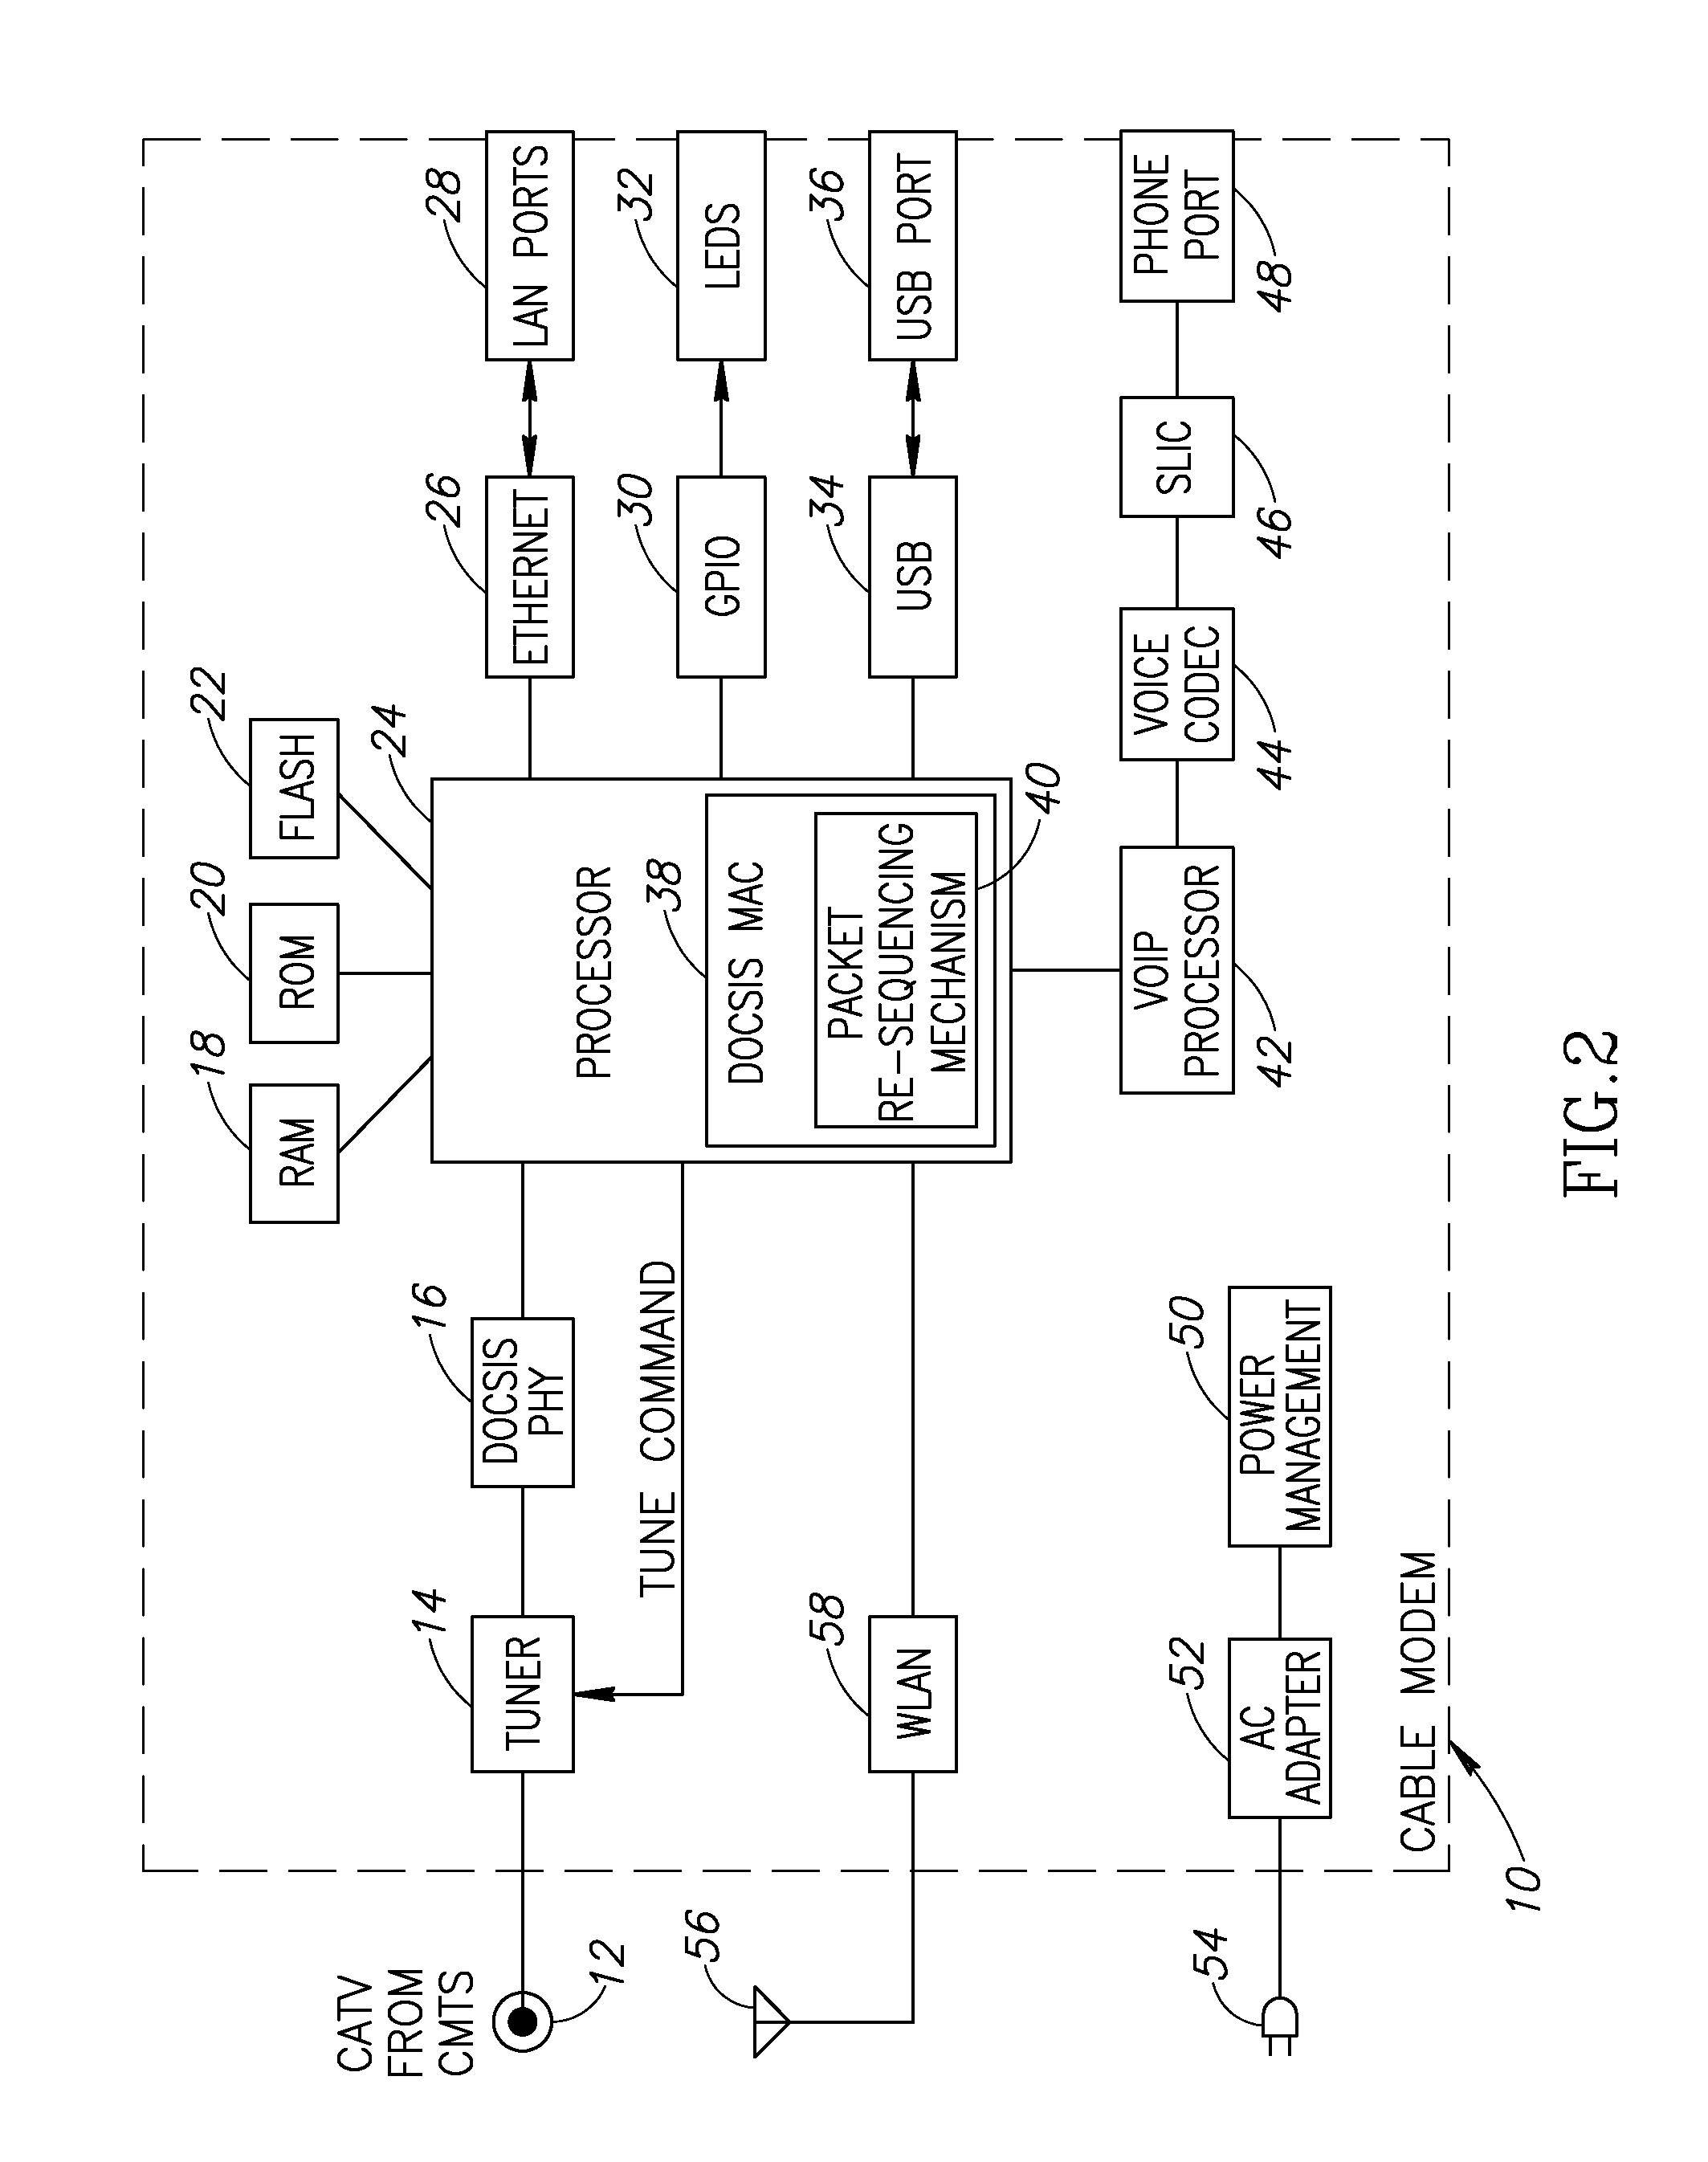 Cable Modem Downstream Channel Bonding Re-sequencing Mechanism